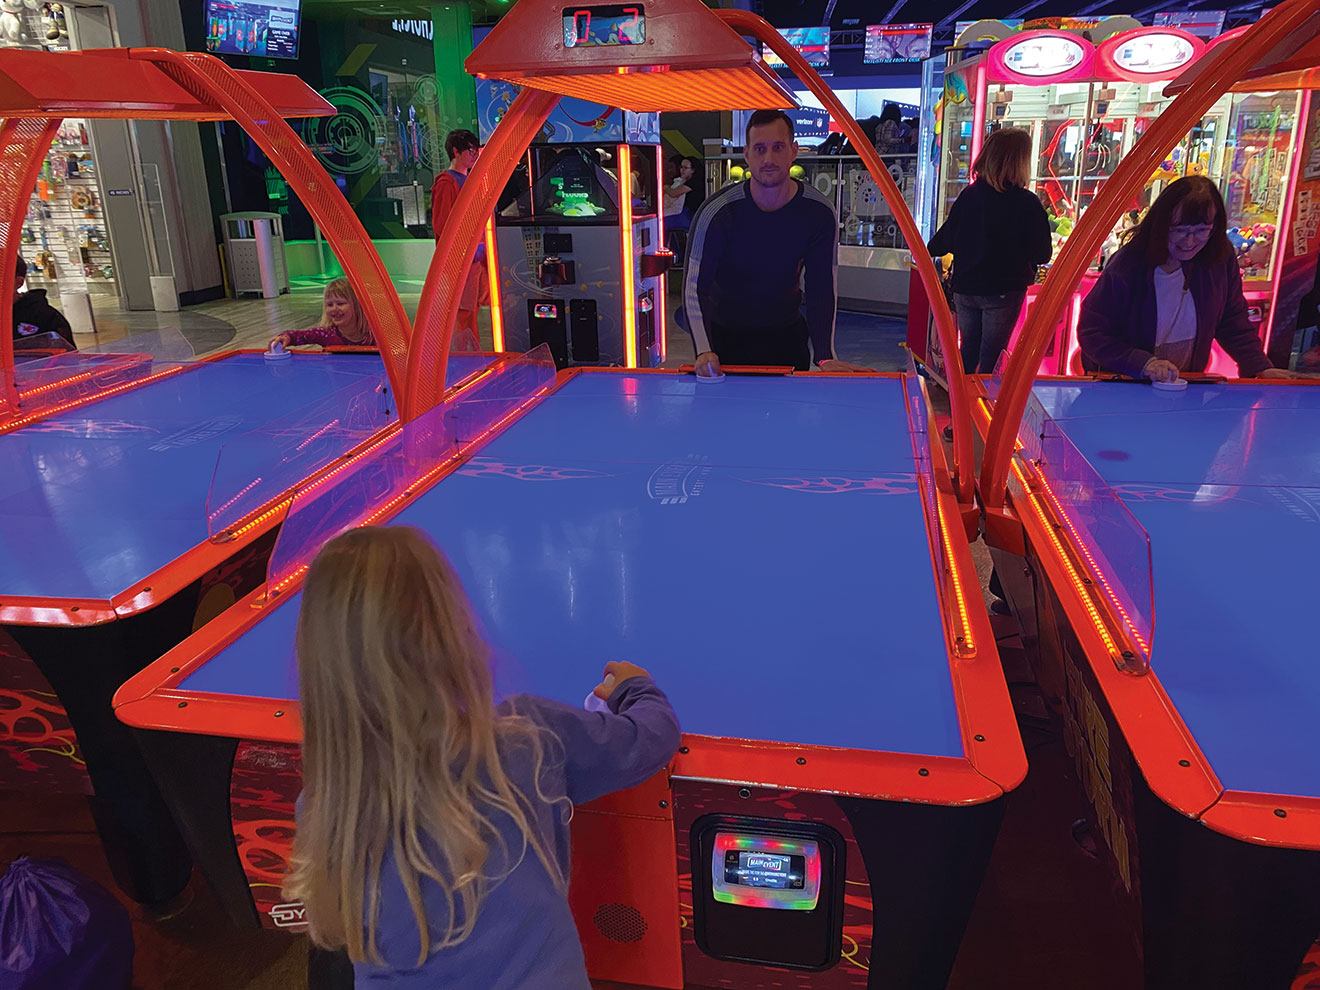 The IMS from Germany is outmatched by his daughter during a heated game of air hockey.